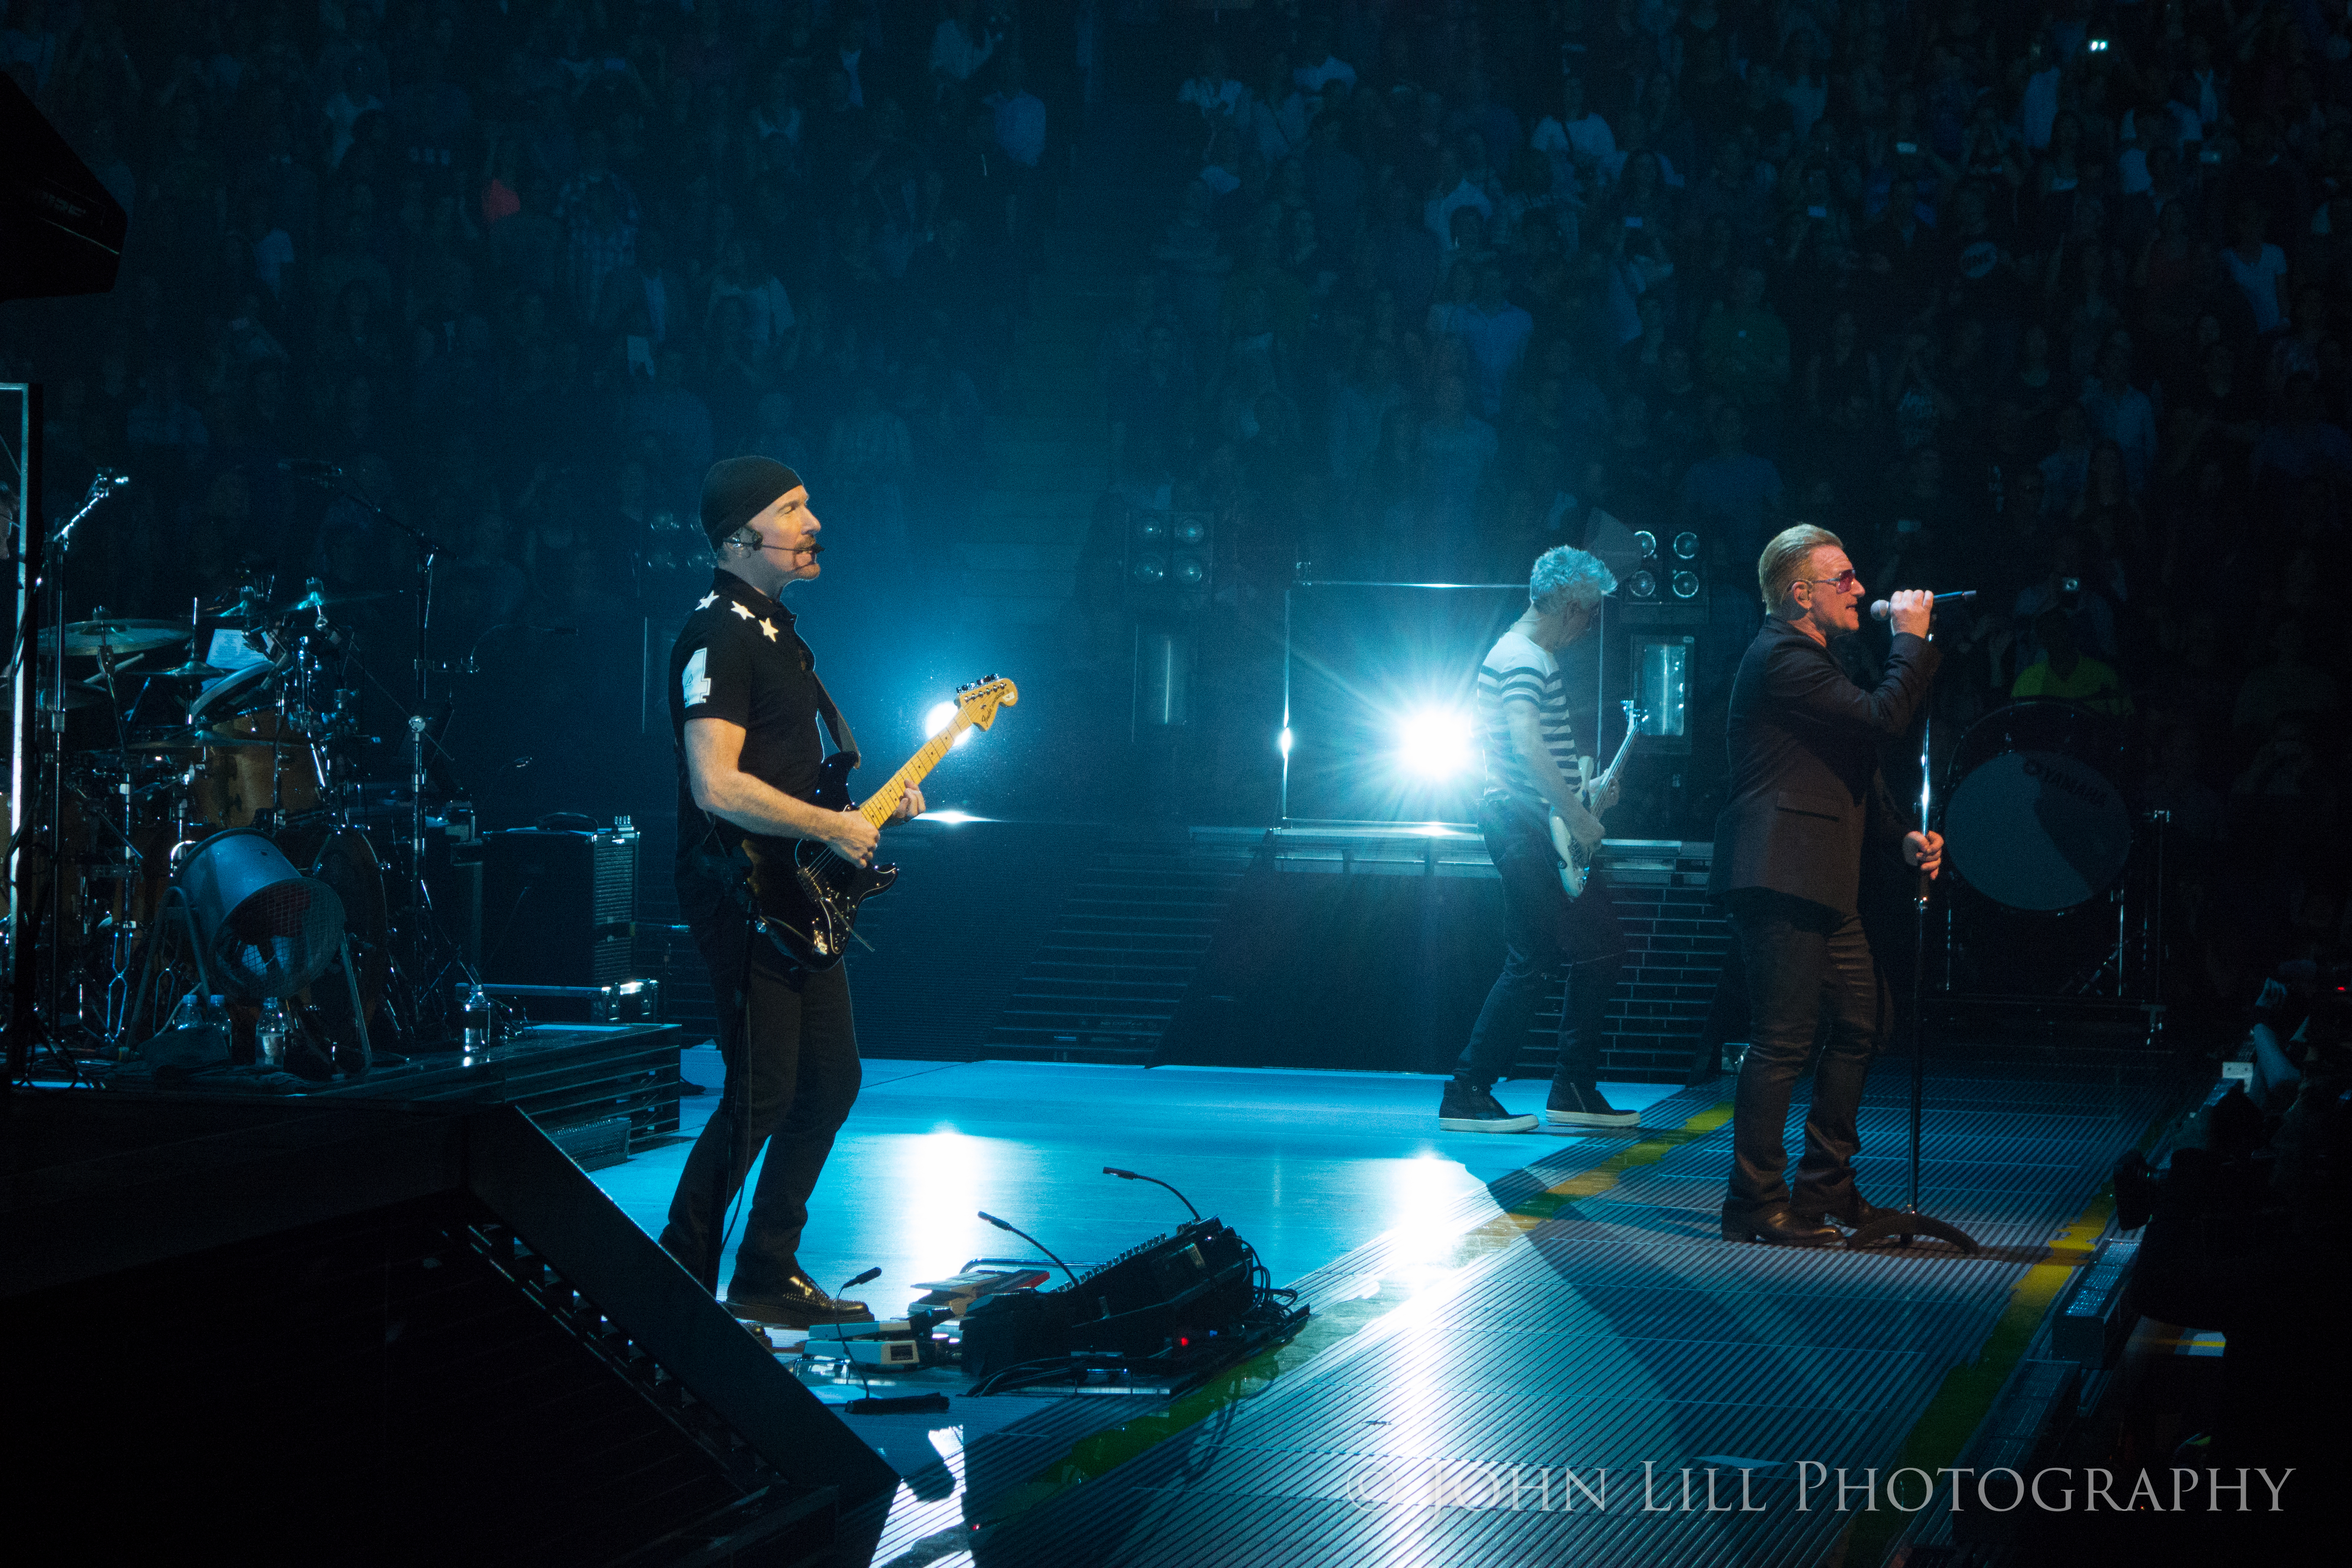 U2 perform at Rogers Arena in Vancouver, B.C. (Photo by John Lill)